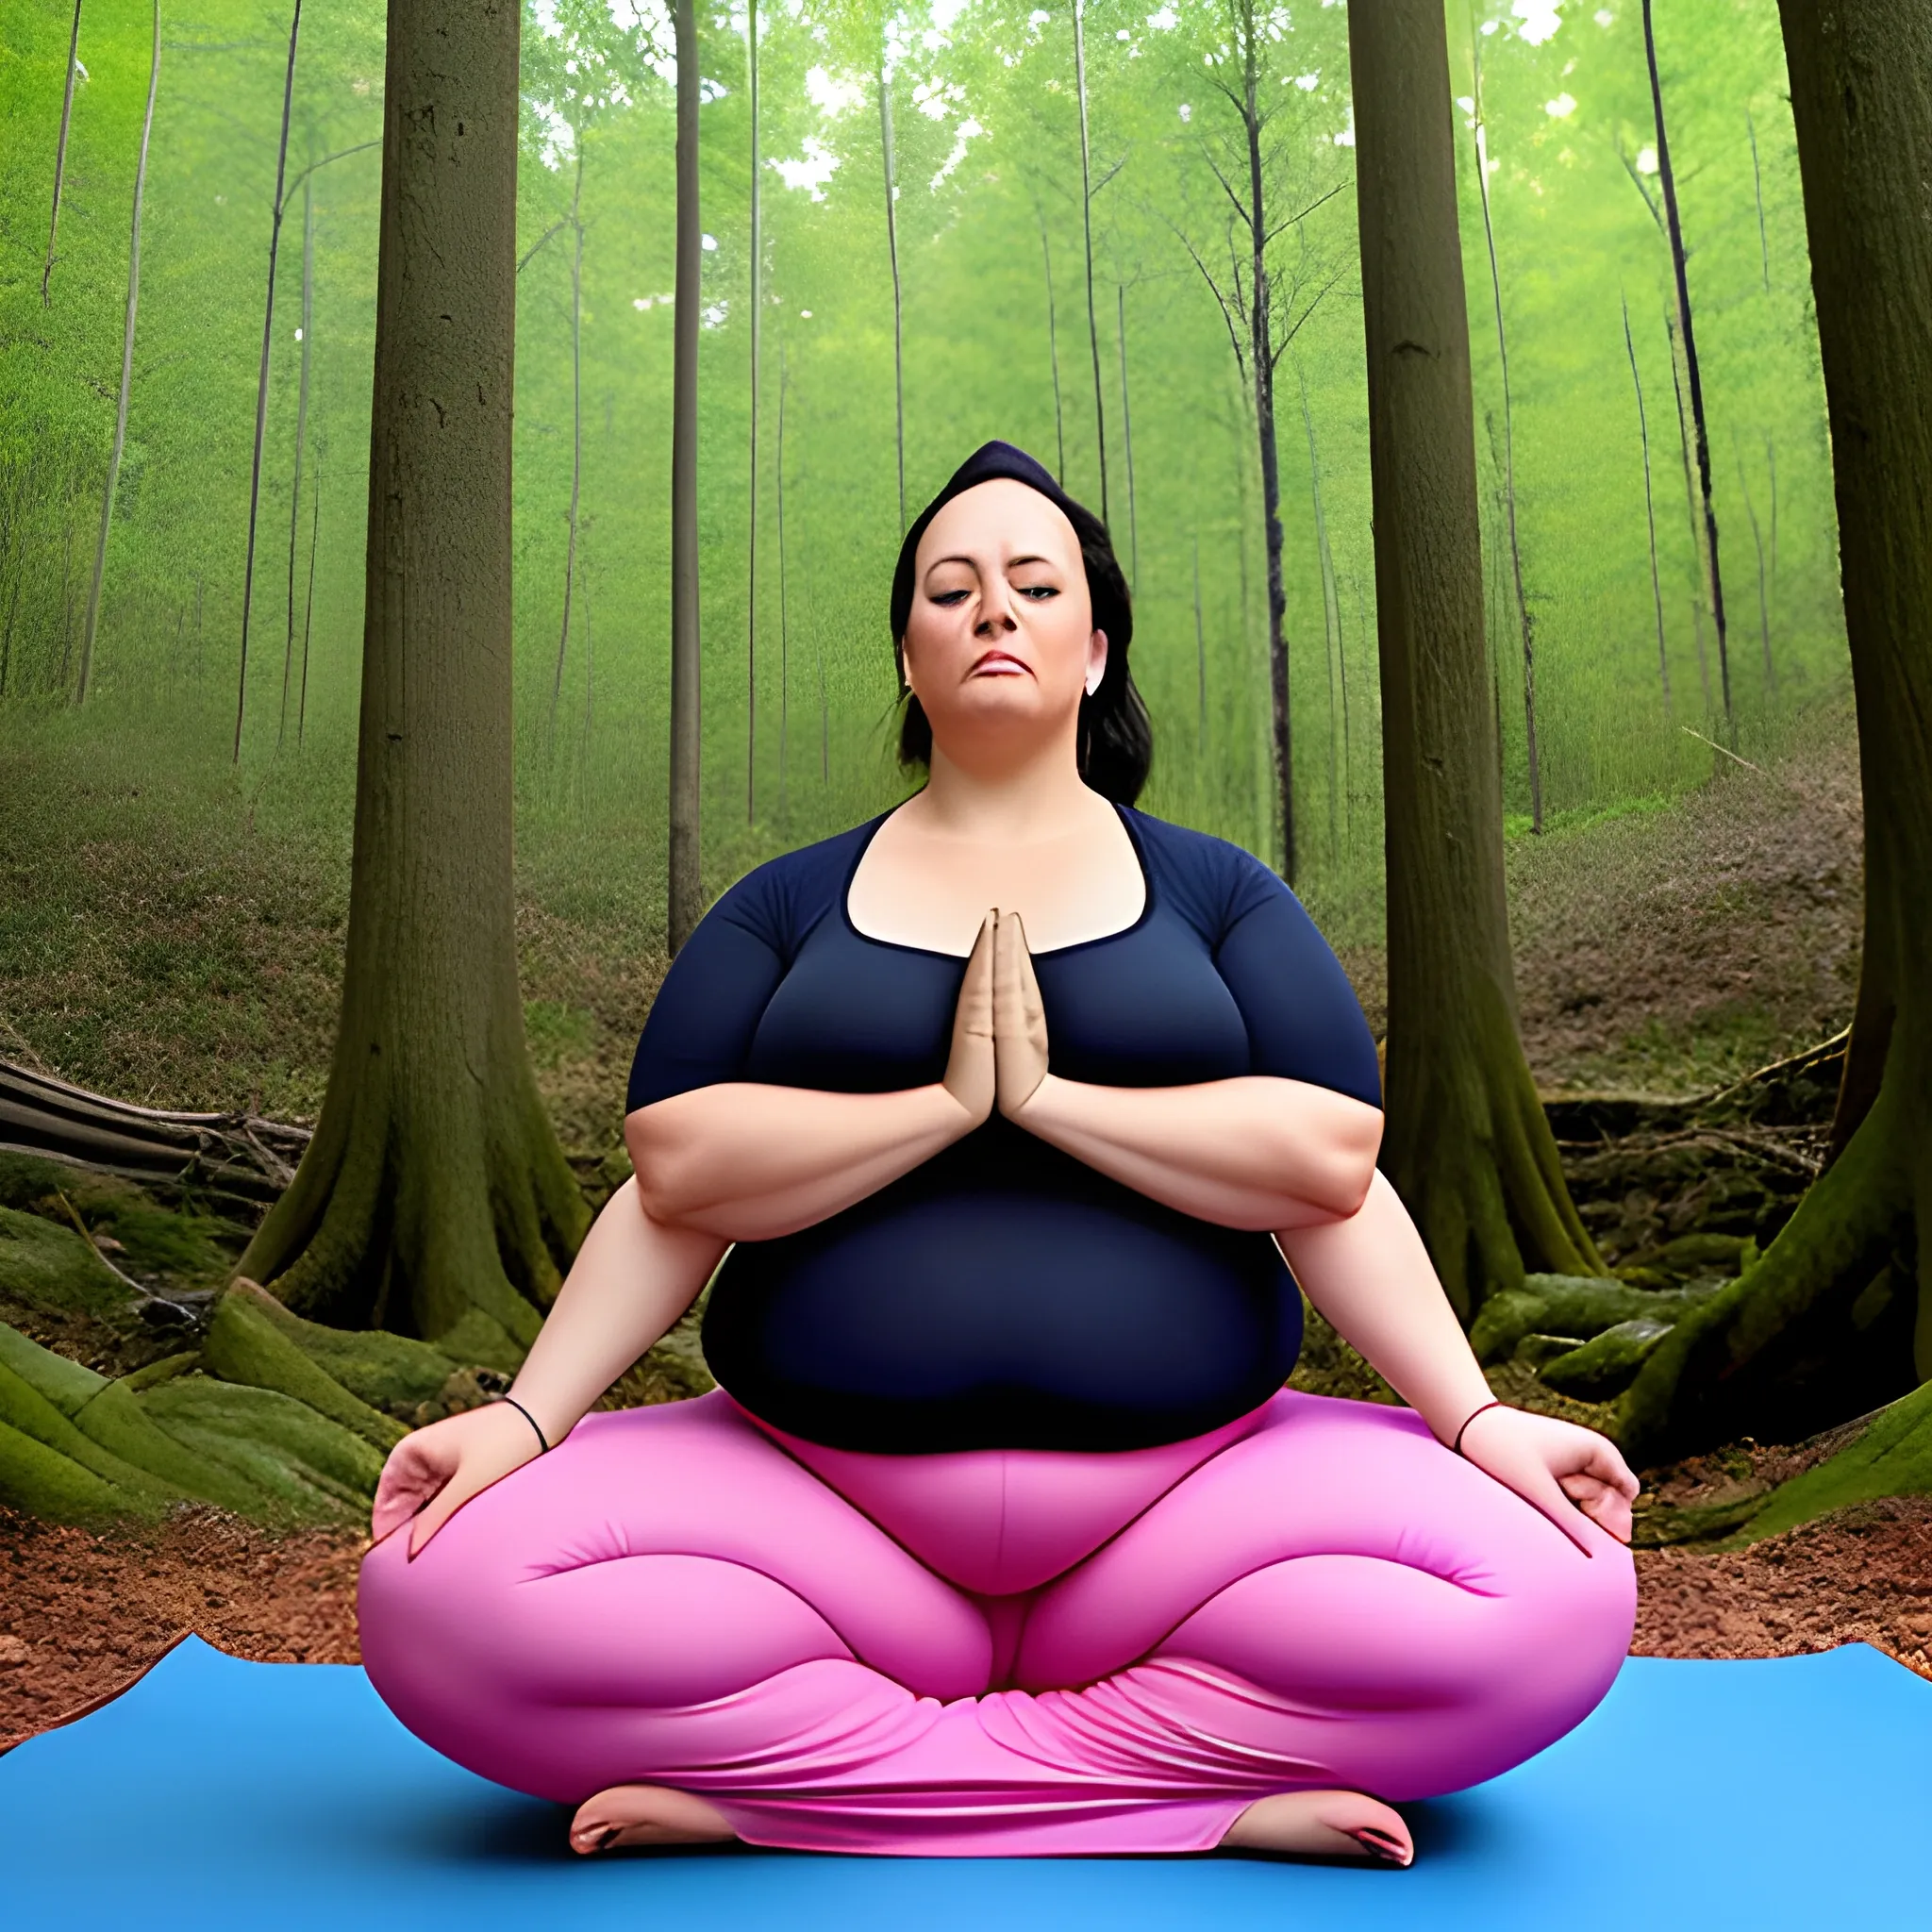 fat girl, yoga, lotus, position, forest, realistic